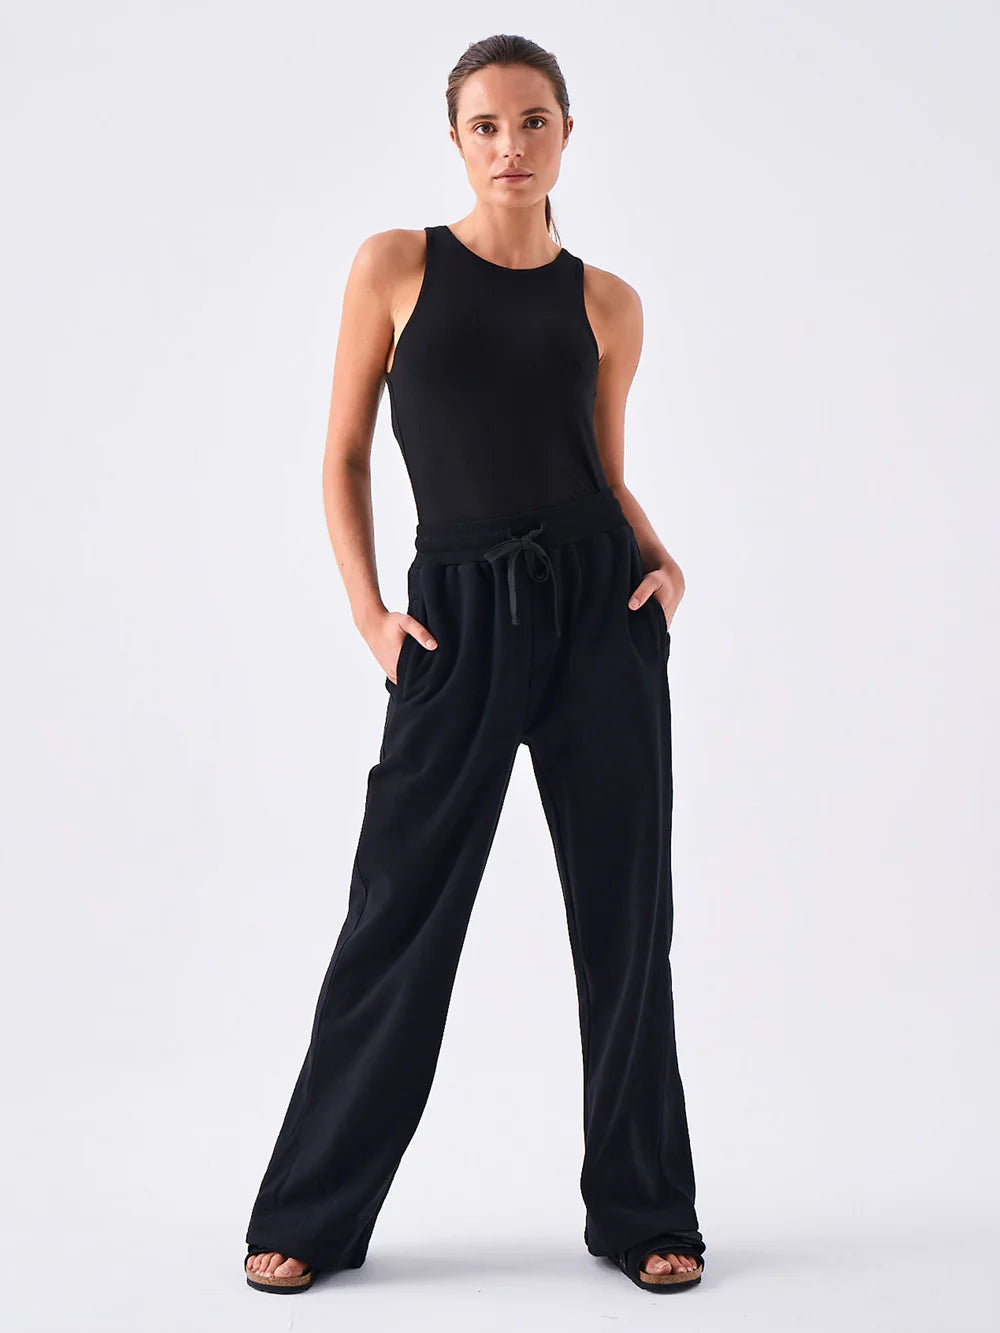 Experience ultimate relaxation in our chic black wide-leg sweat pants. Unbeatable comfort meets modern style!